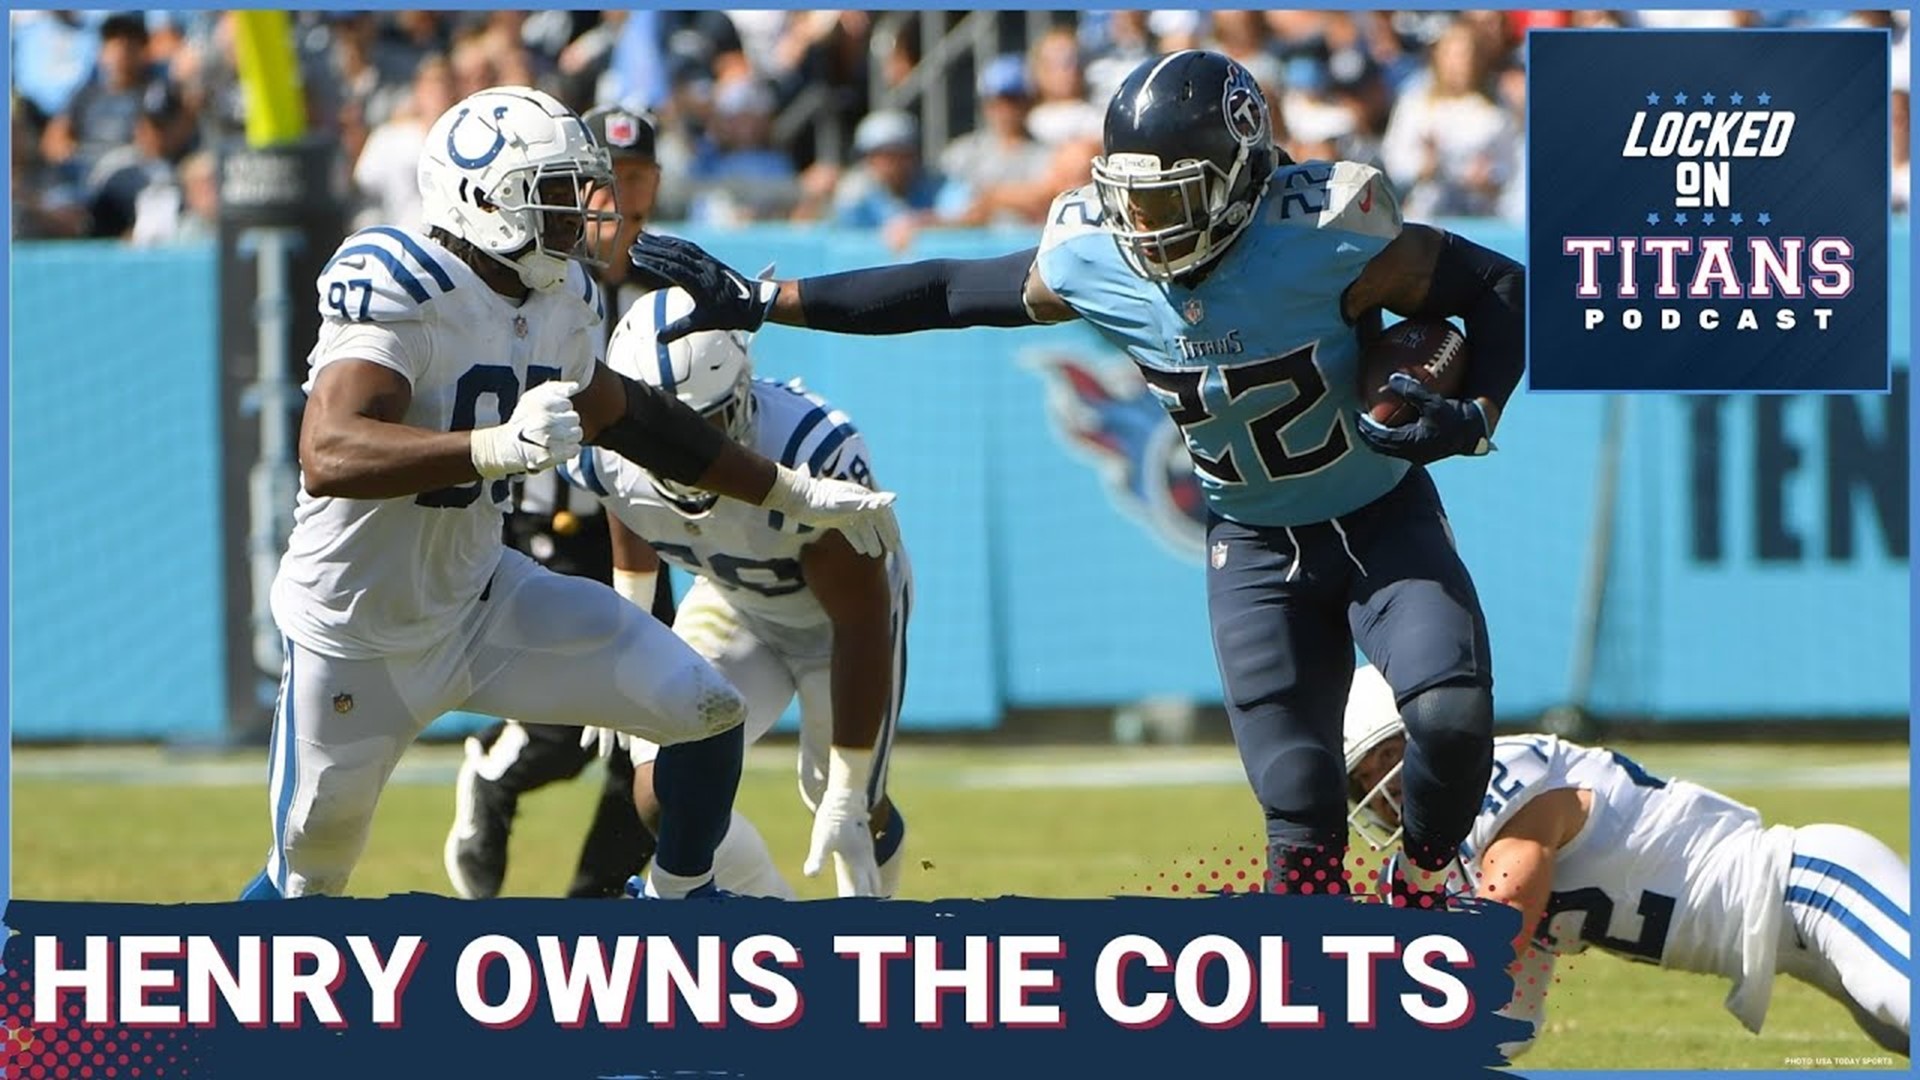 The Tennessee Titans play their first division game this weekend against the Indianapolis Colts. The battle upfront will be at the center of game as it always is